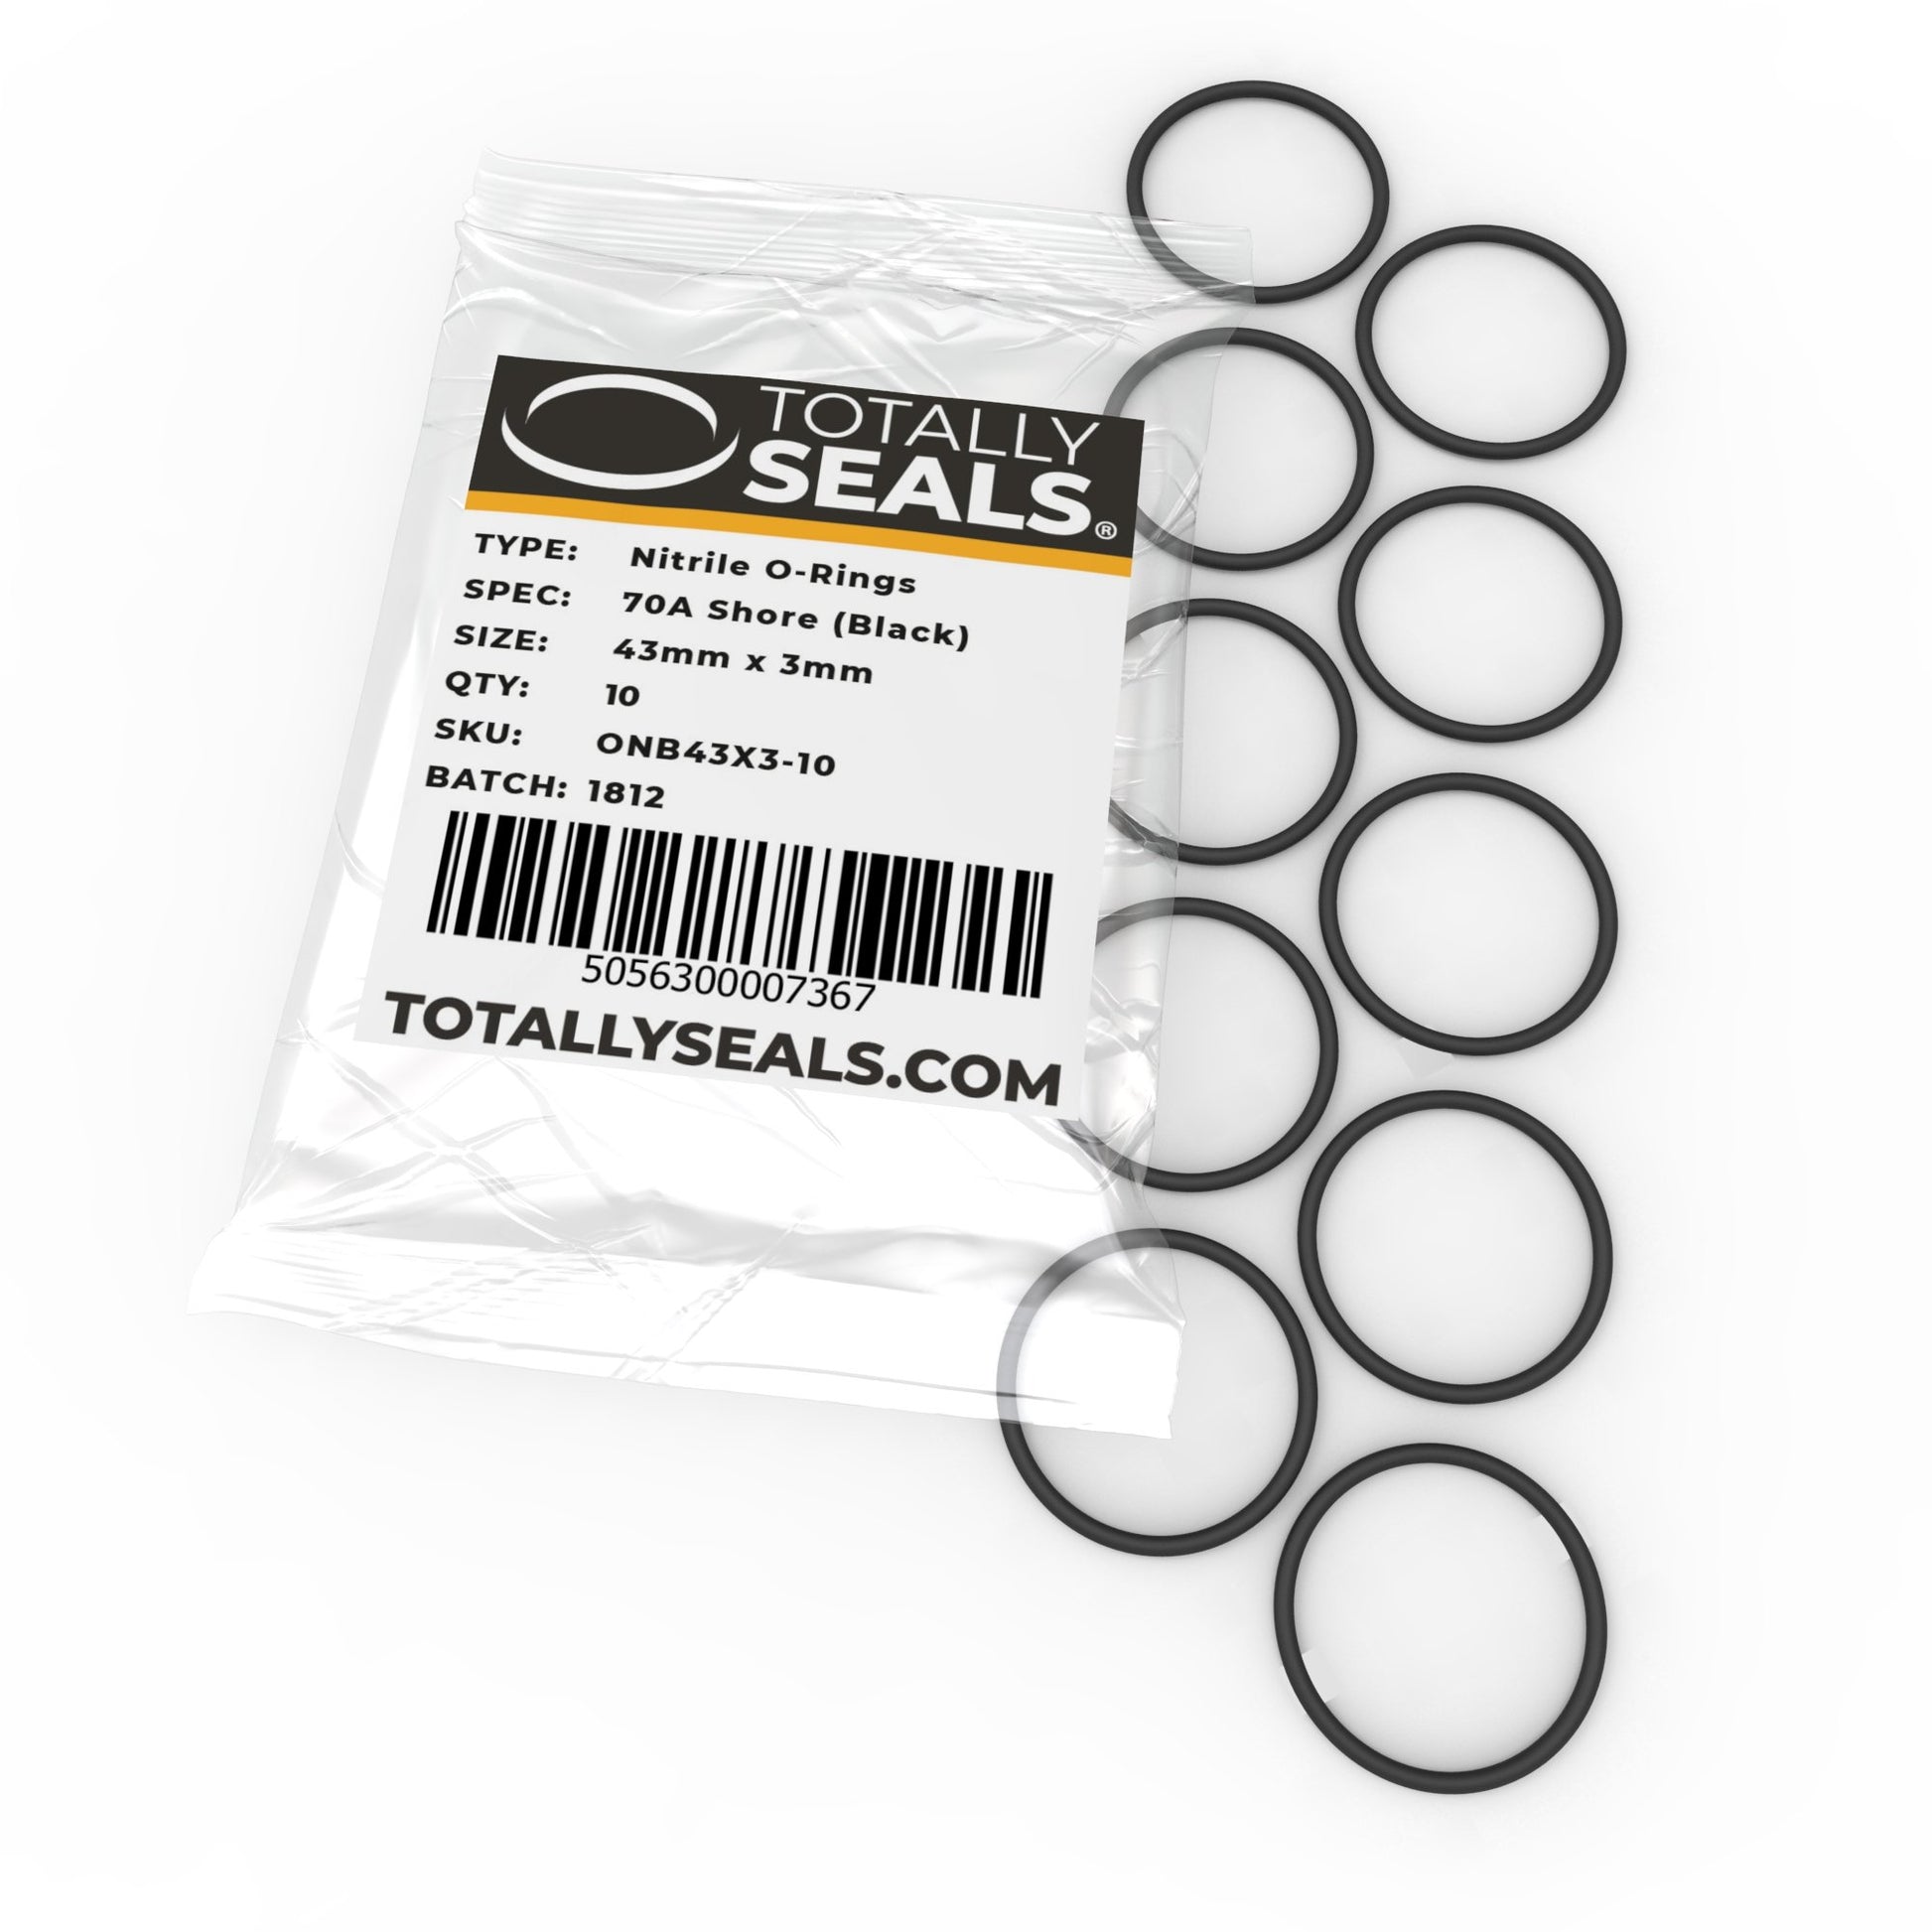 43mm x 3mm (49mm OD) Nitrile O-Rings - Totally Seals®